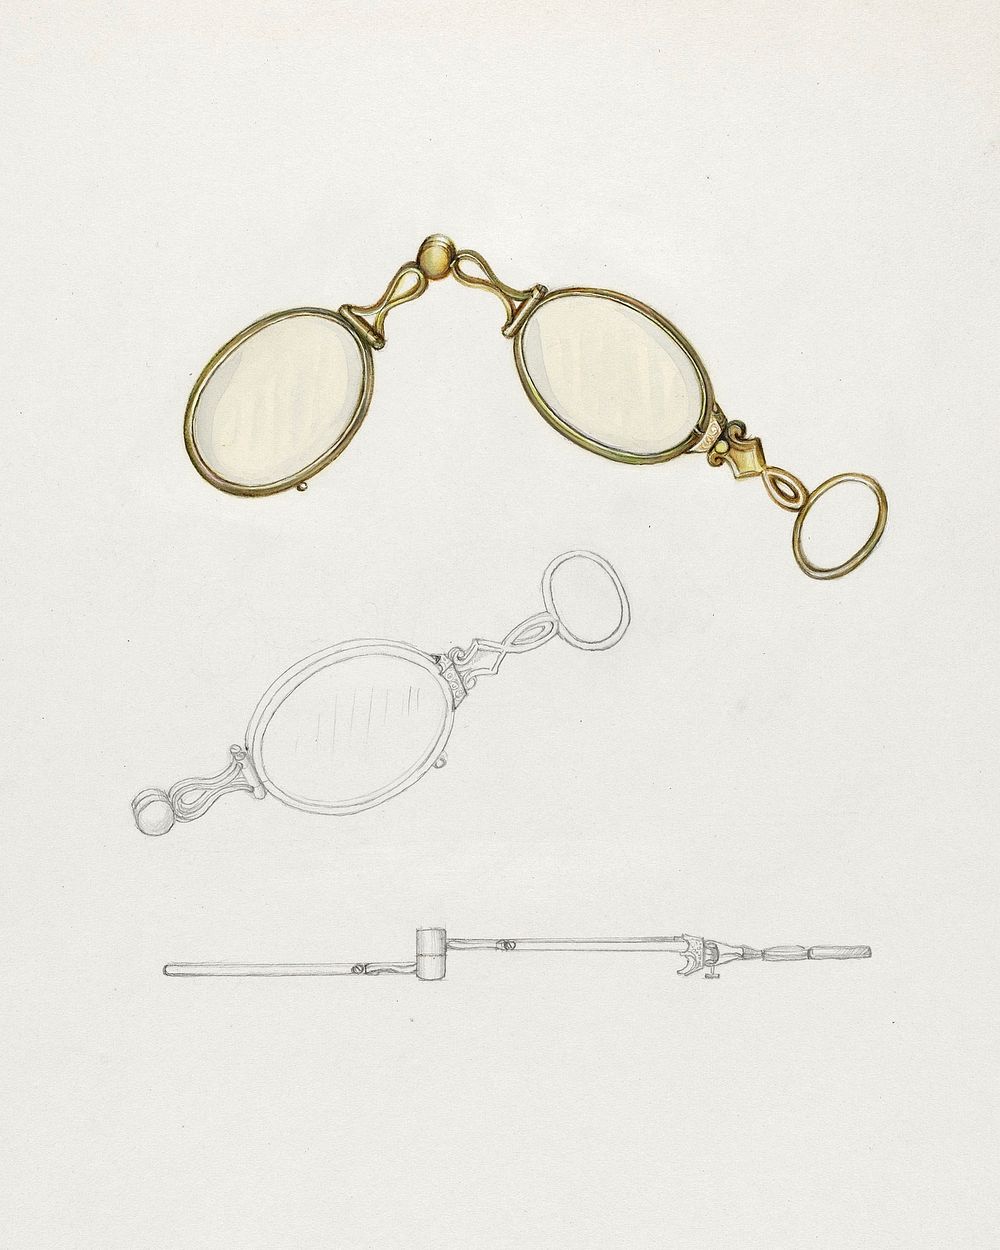 Lorgnette (ca. 1940) by Sylvia De Zon. Original from The National Gallery of Art. Digitally enhanced by rawpixel.